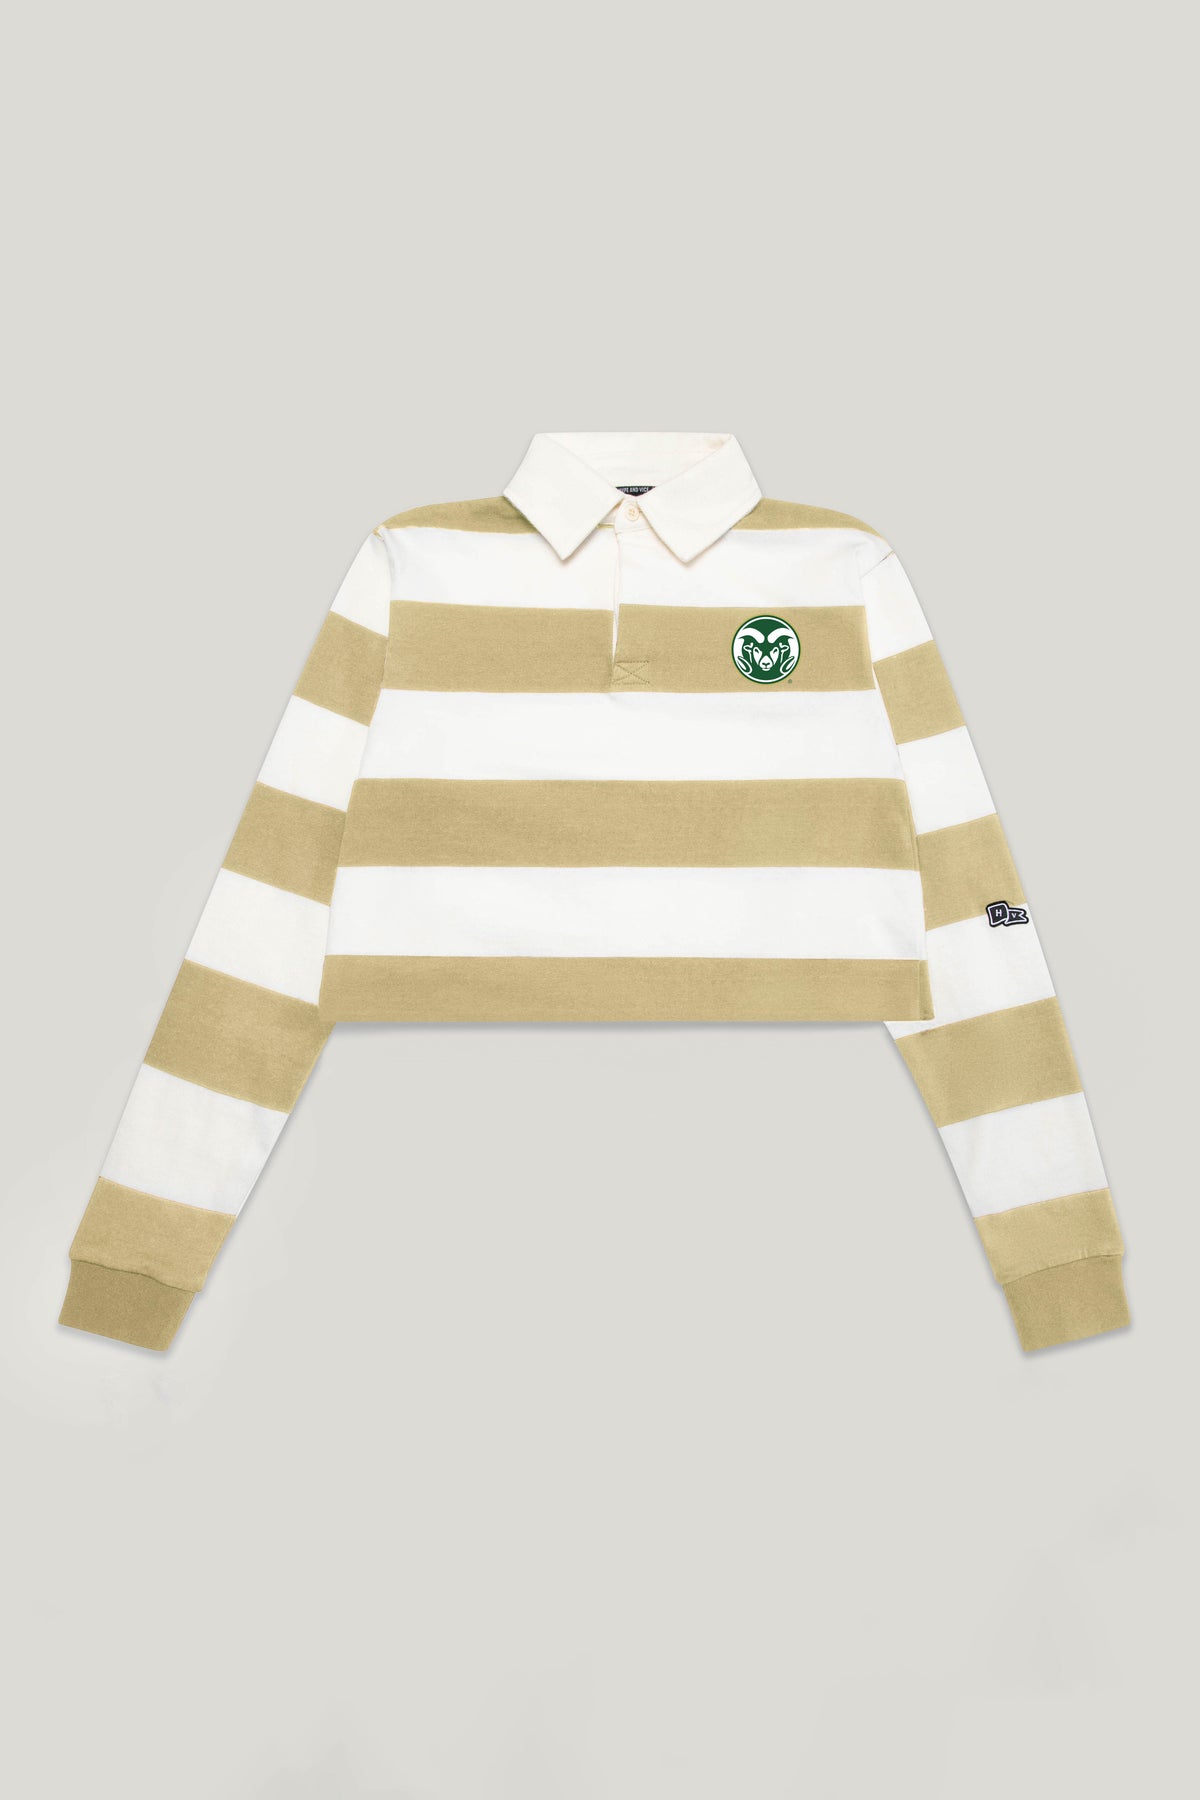 Colorado State Rugby Top